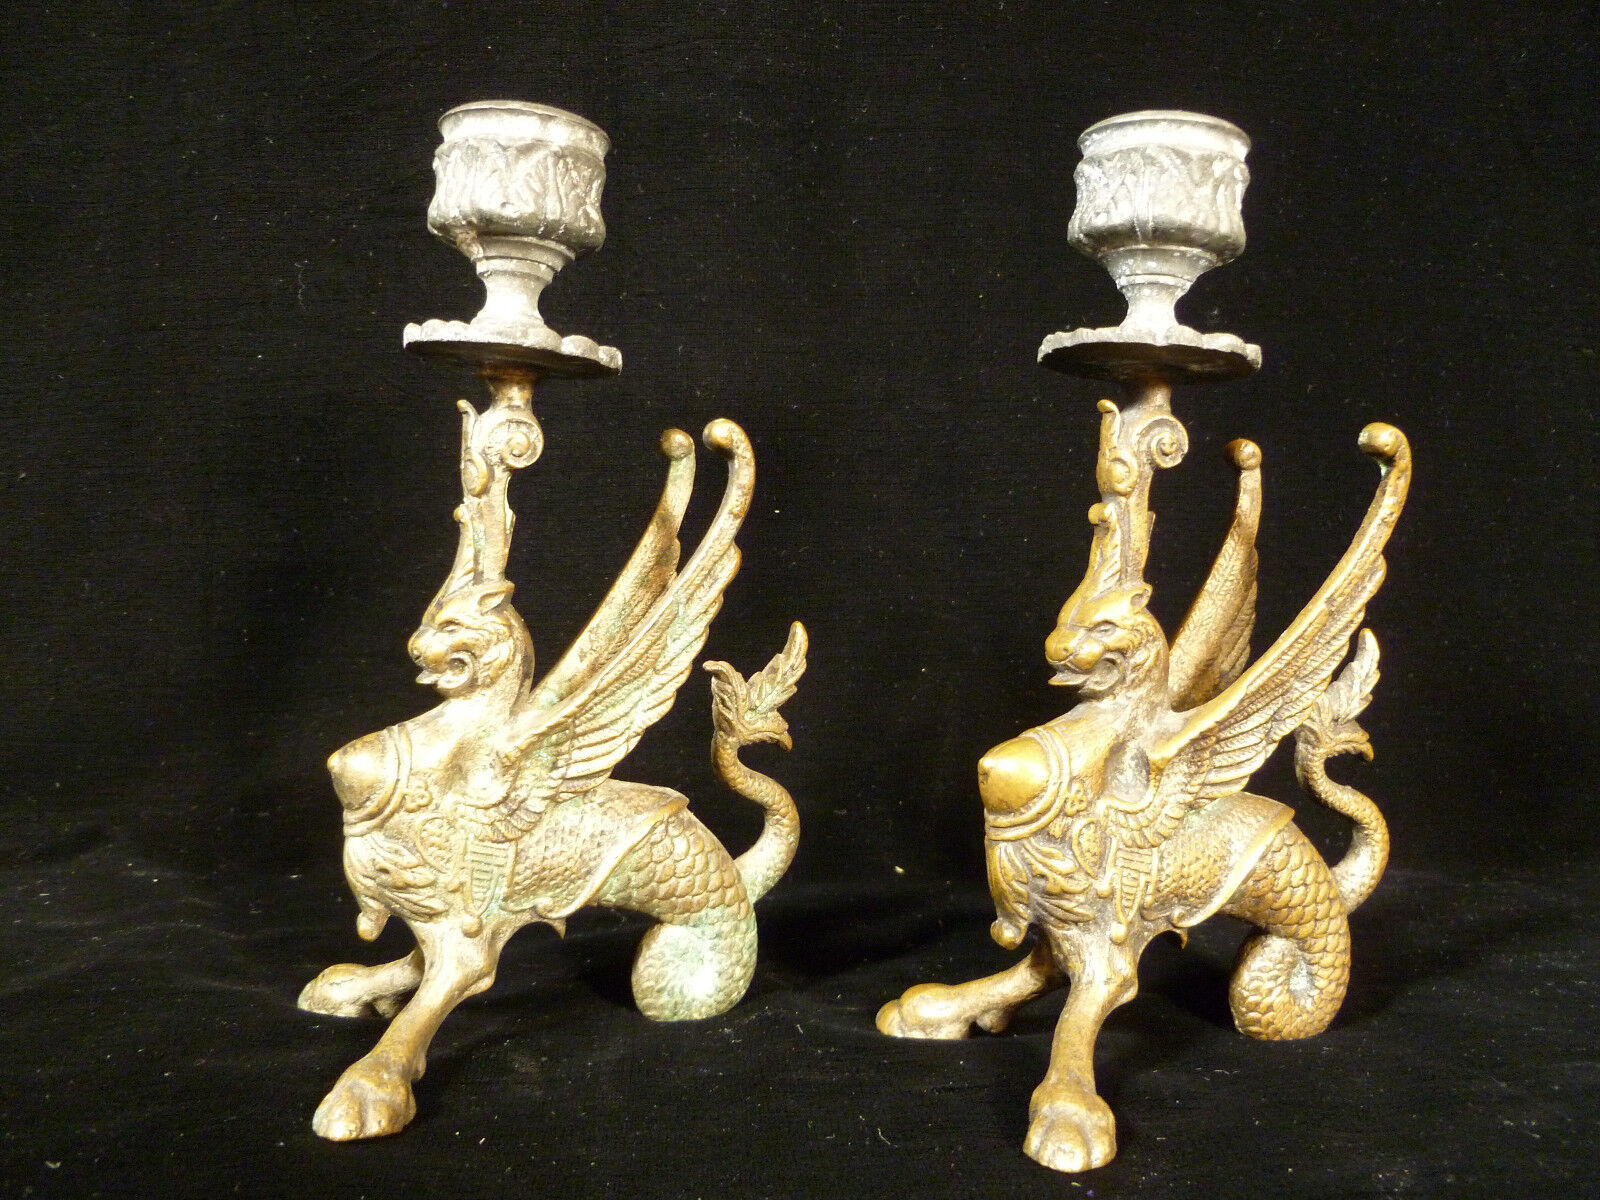 RARE PAIR OF EGYPTIAN REVIVAL WINGED GRIFFIN BRONZE CANDLE HOLDERS - CIRCA 1840